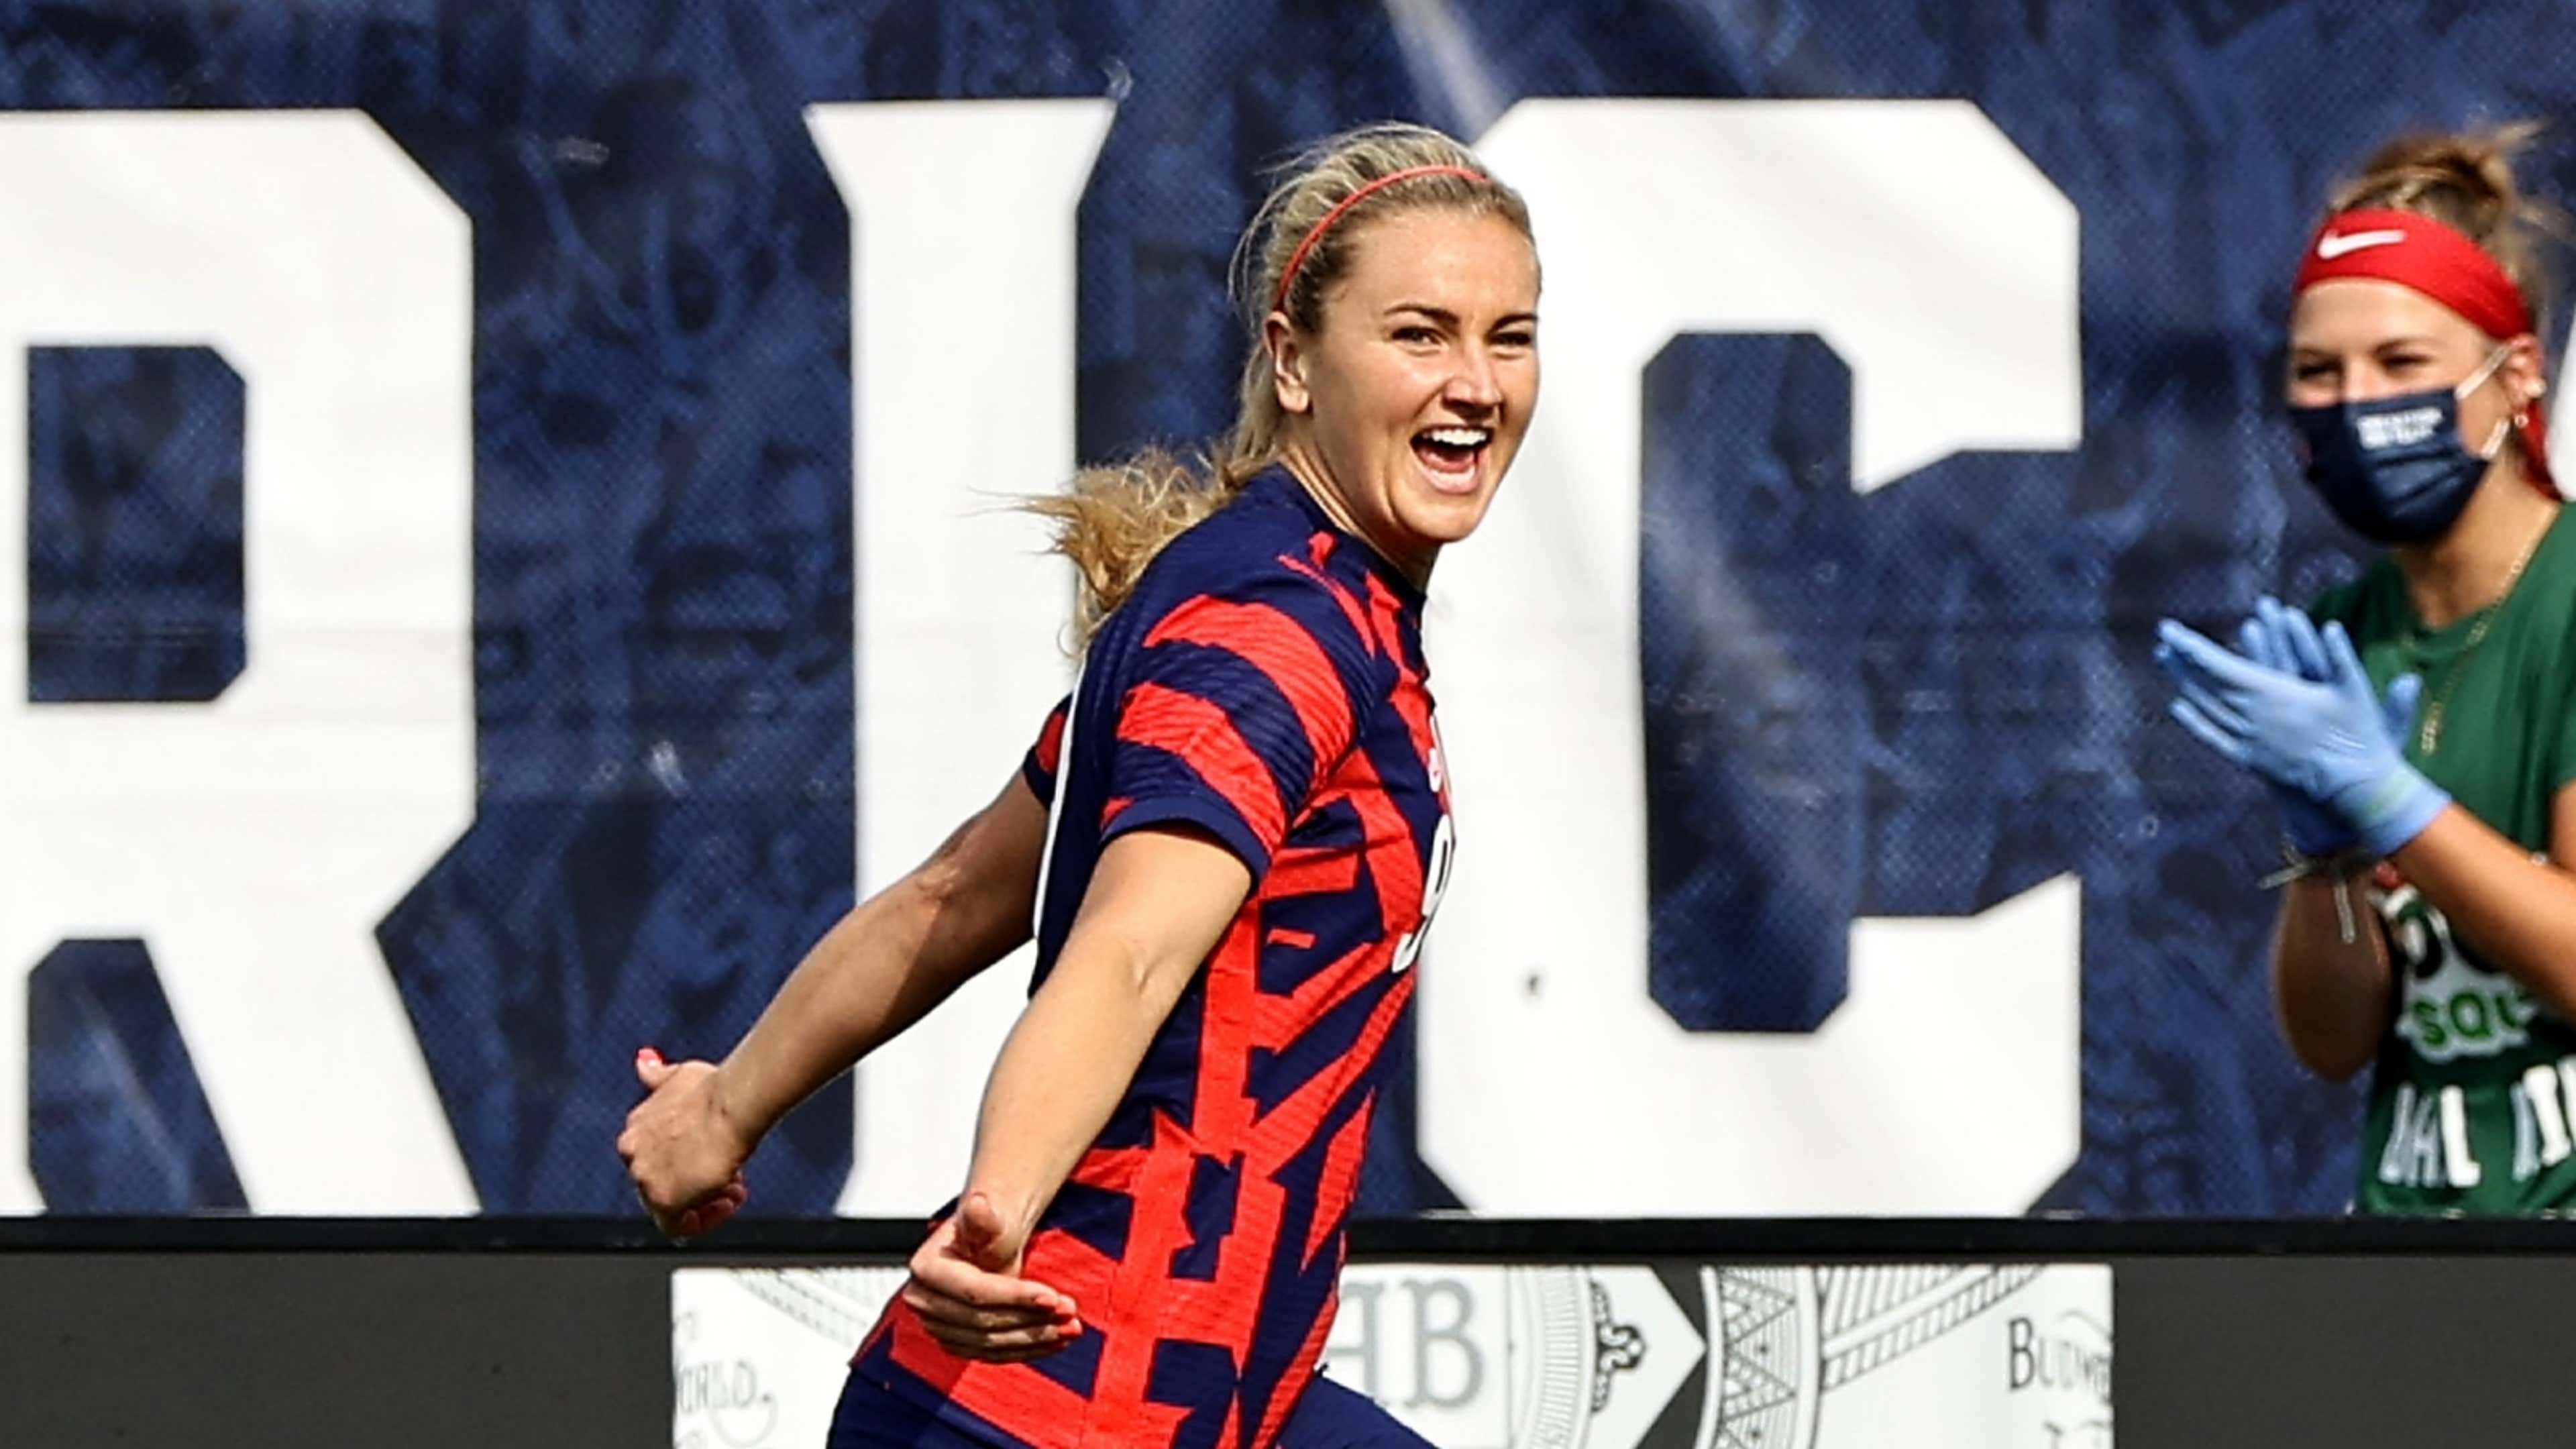 Lindsey Horan - USWNT & Portland Thorns Soccer Star from Sports Business  Radio Podcast - Listen on JioSaavn